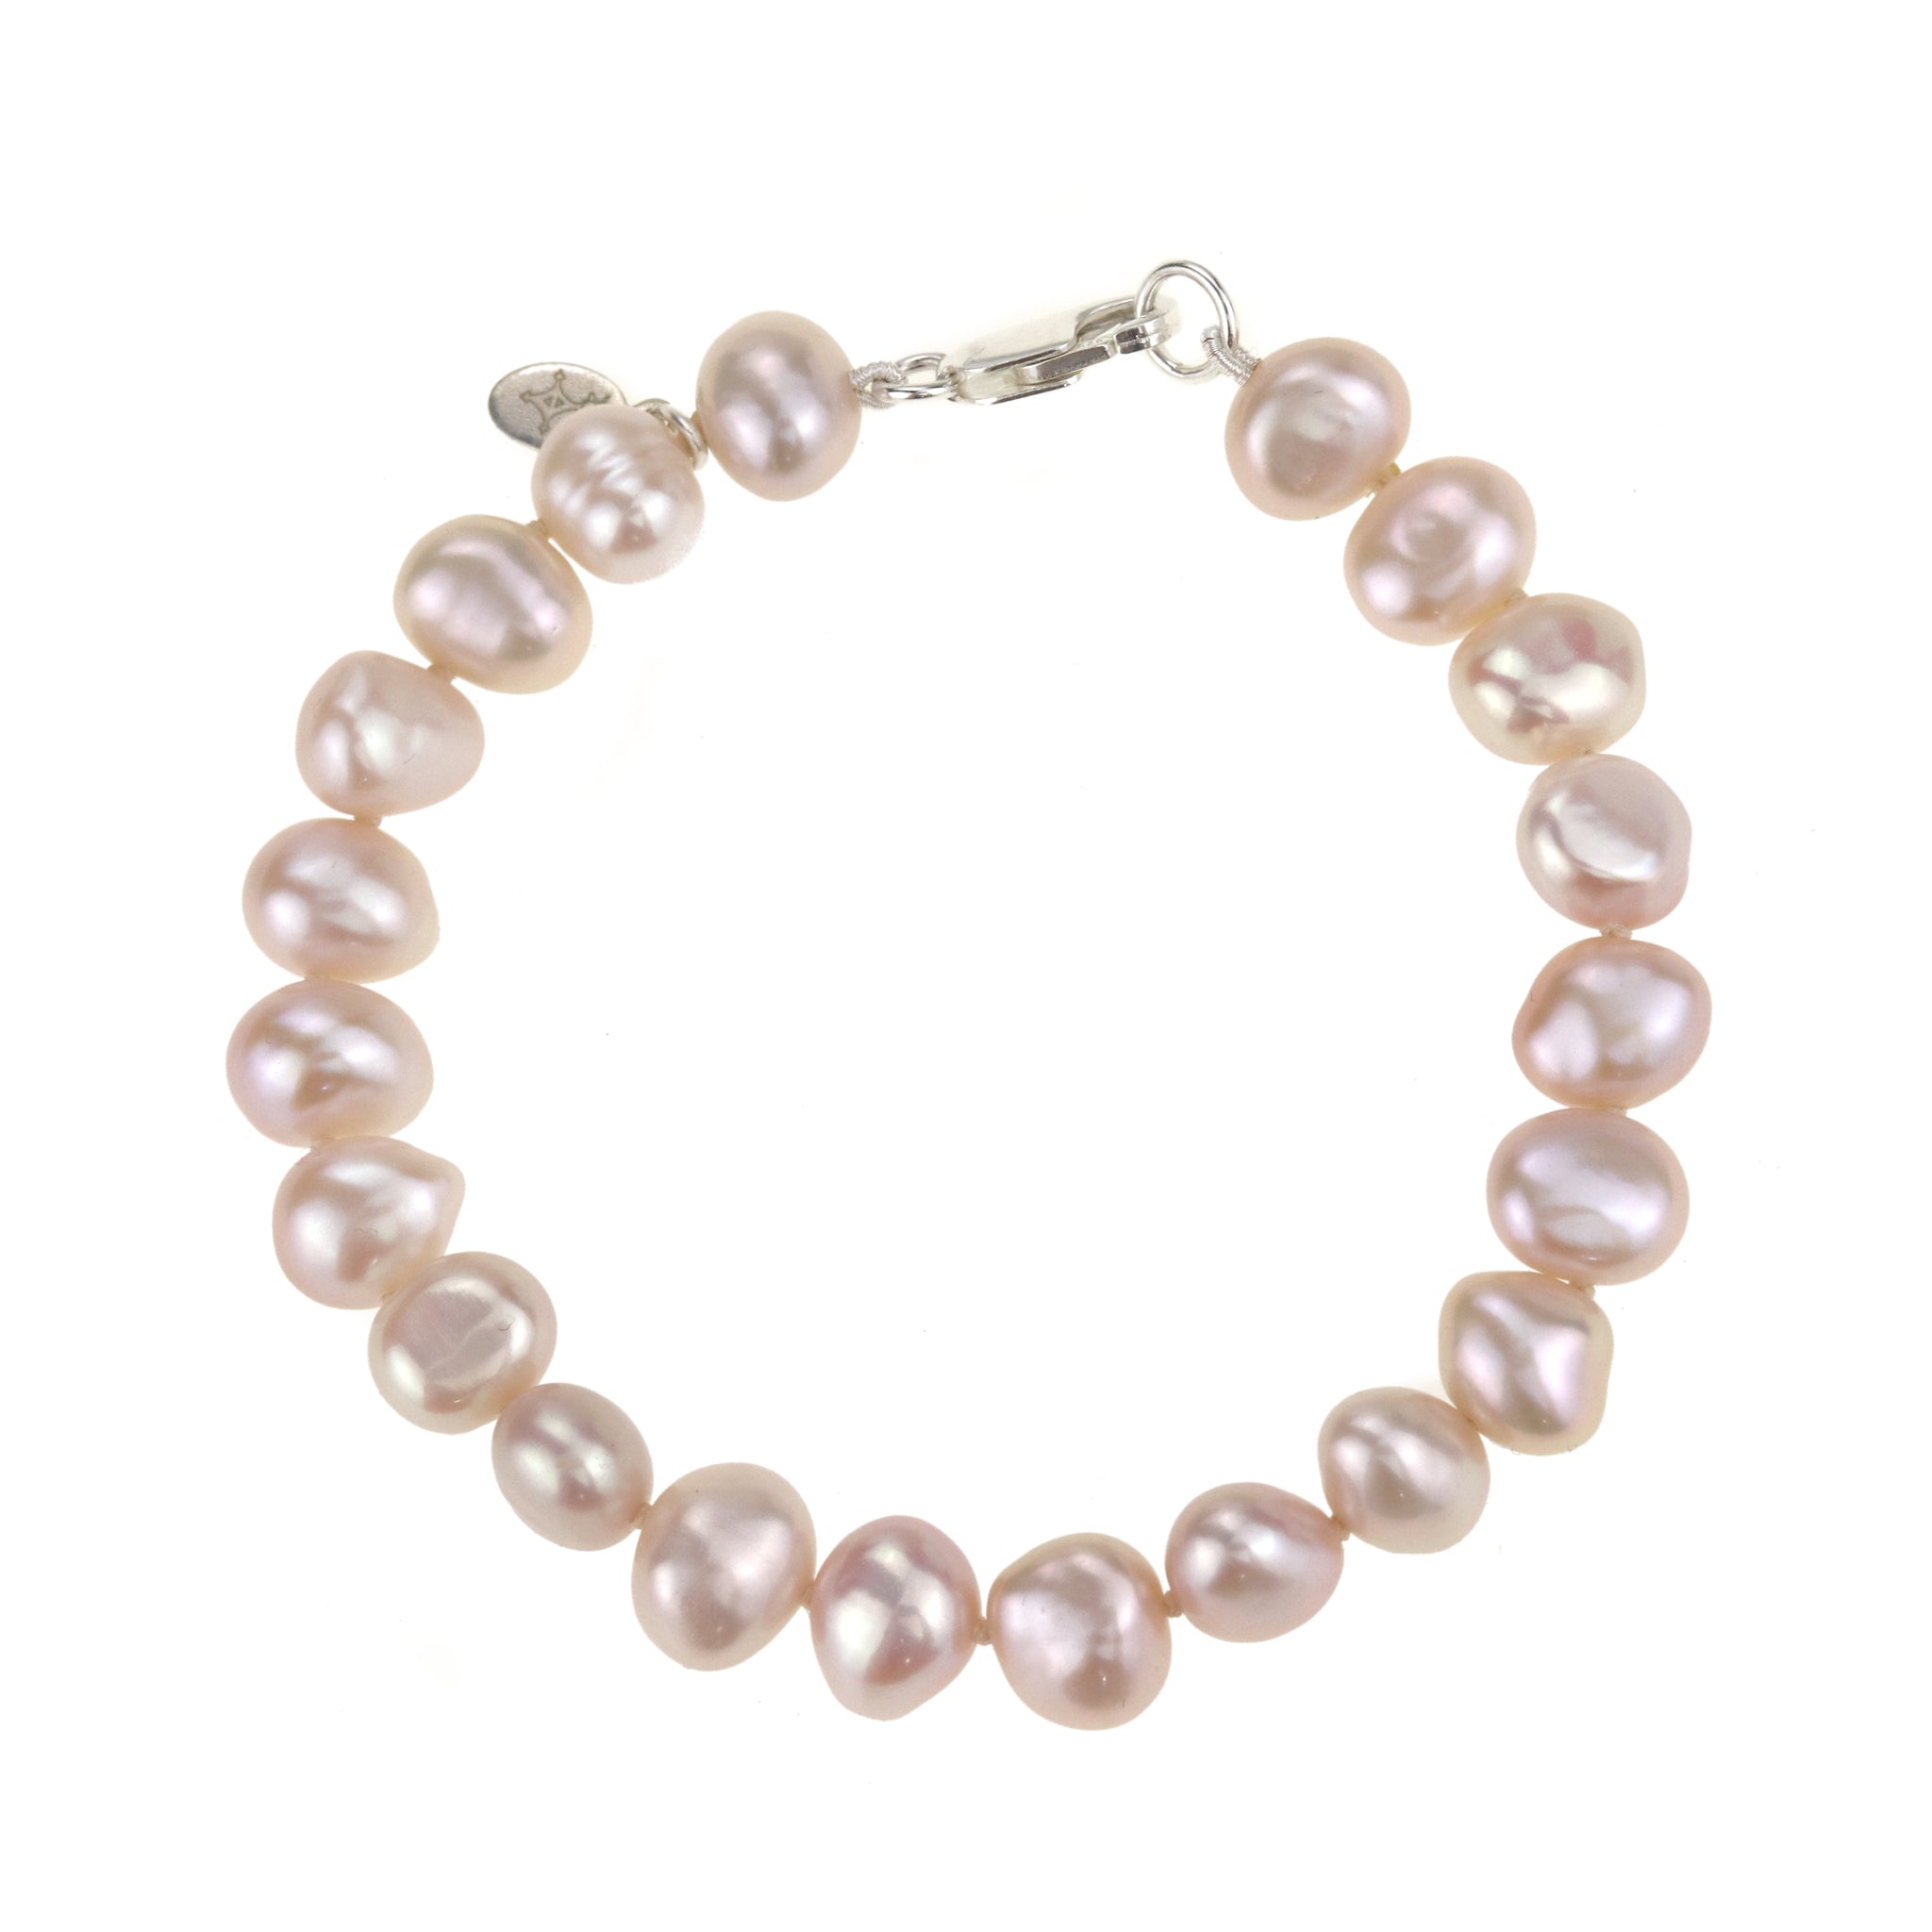 Buy Shubhanjali Pearl Bracelet Adjustable Five Beads Rose Gold Plated Link  Chain Bracelet for Women and Girls (White) at Amazon.in